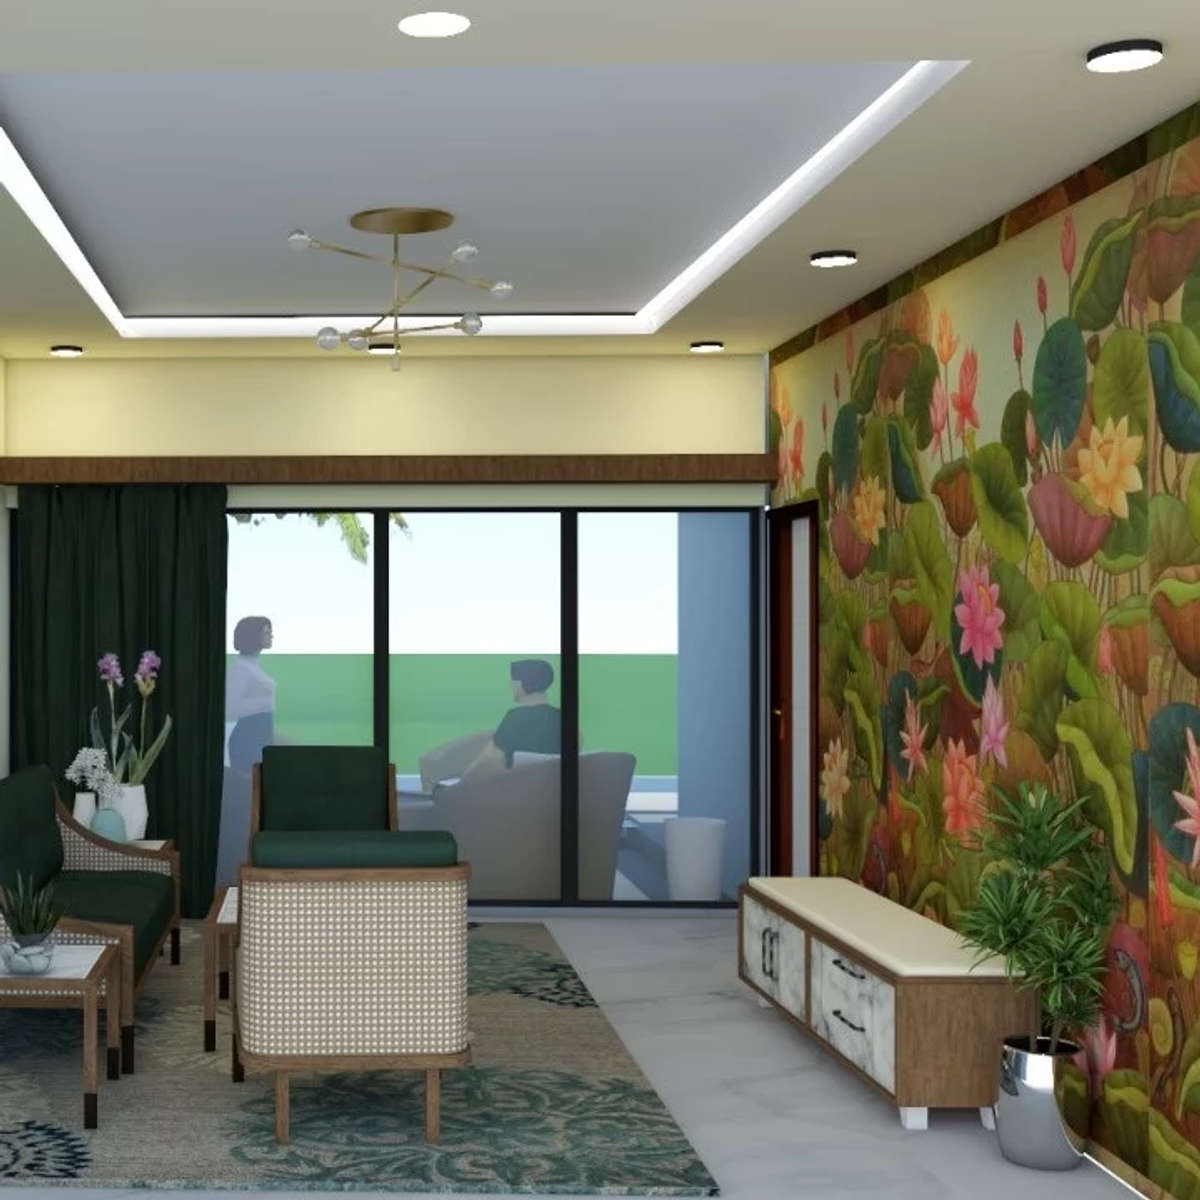 Ceiling, Lighting Designs by Architect Payal Kapoor, Indore | Kolo